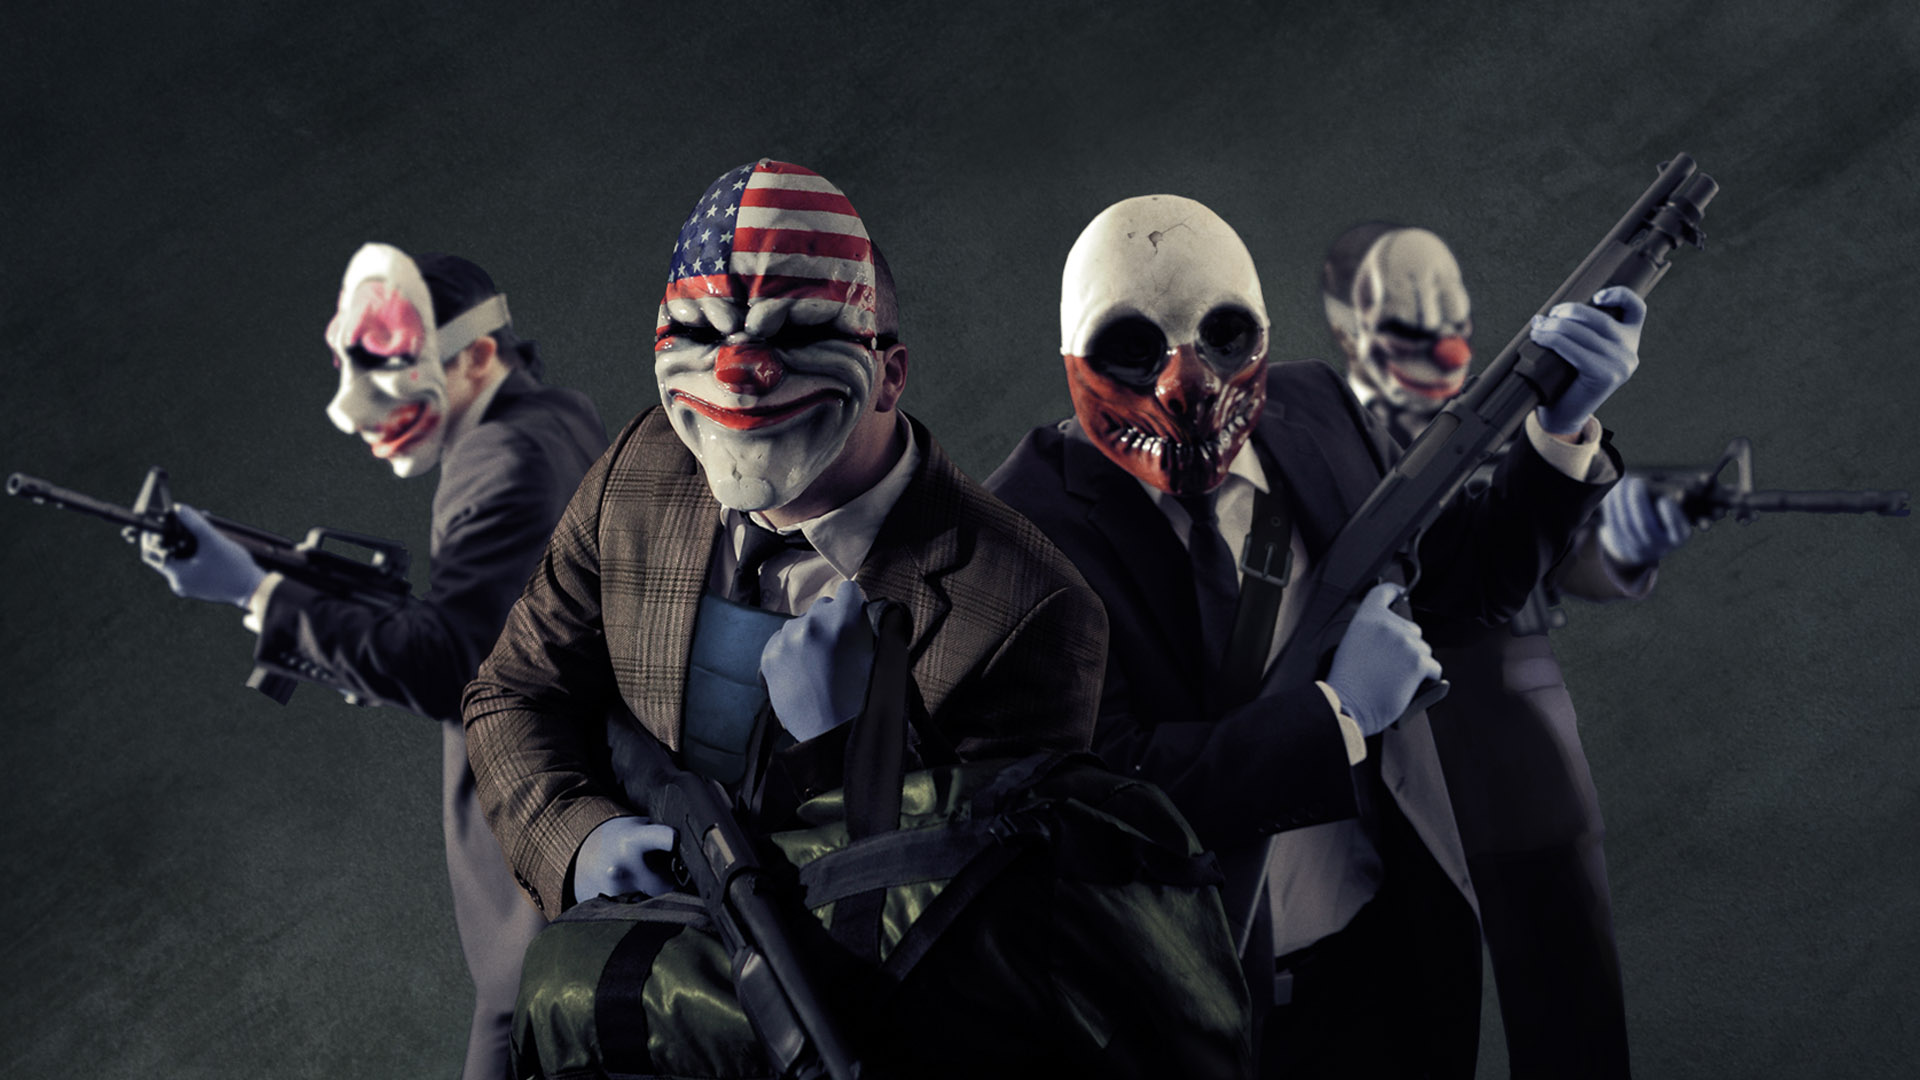 Cook faster для payday 2 фото 70